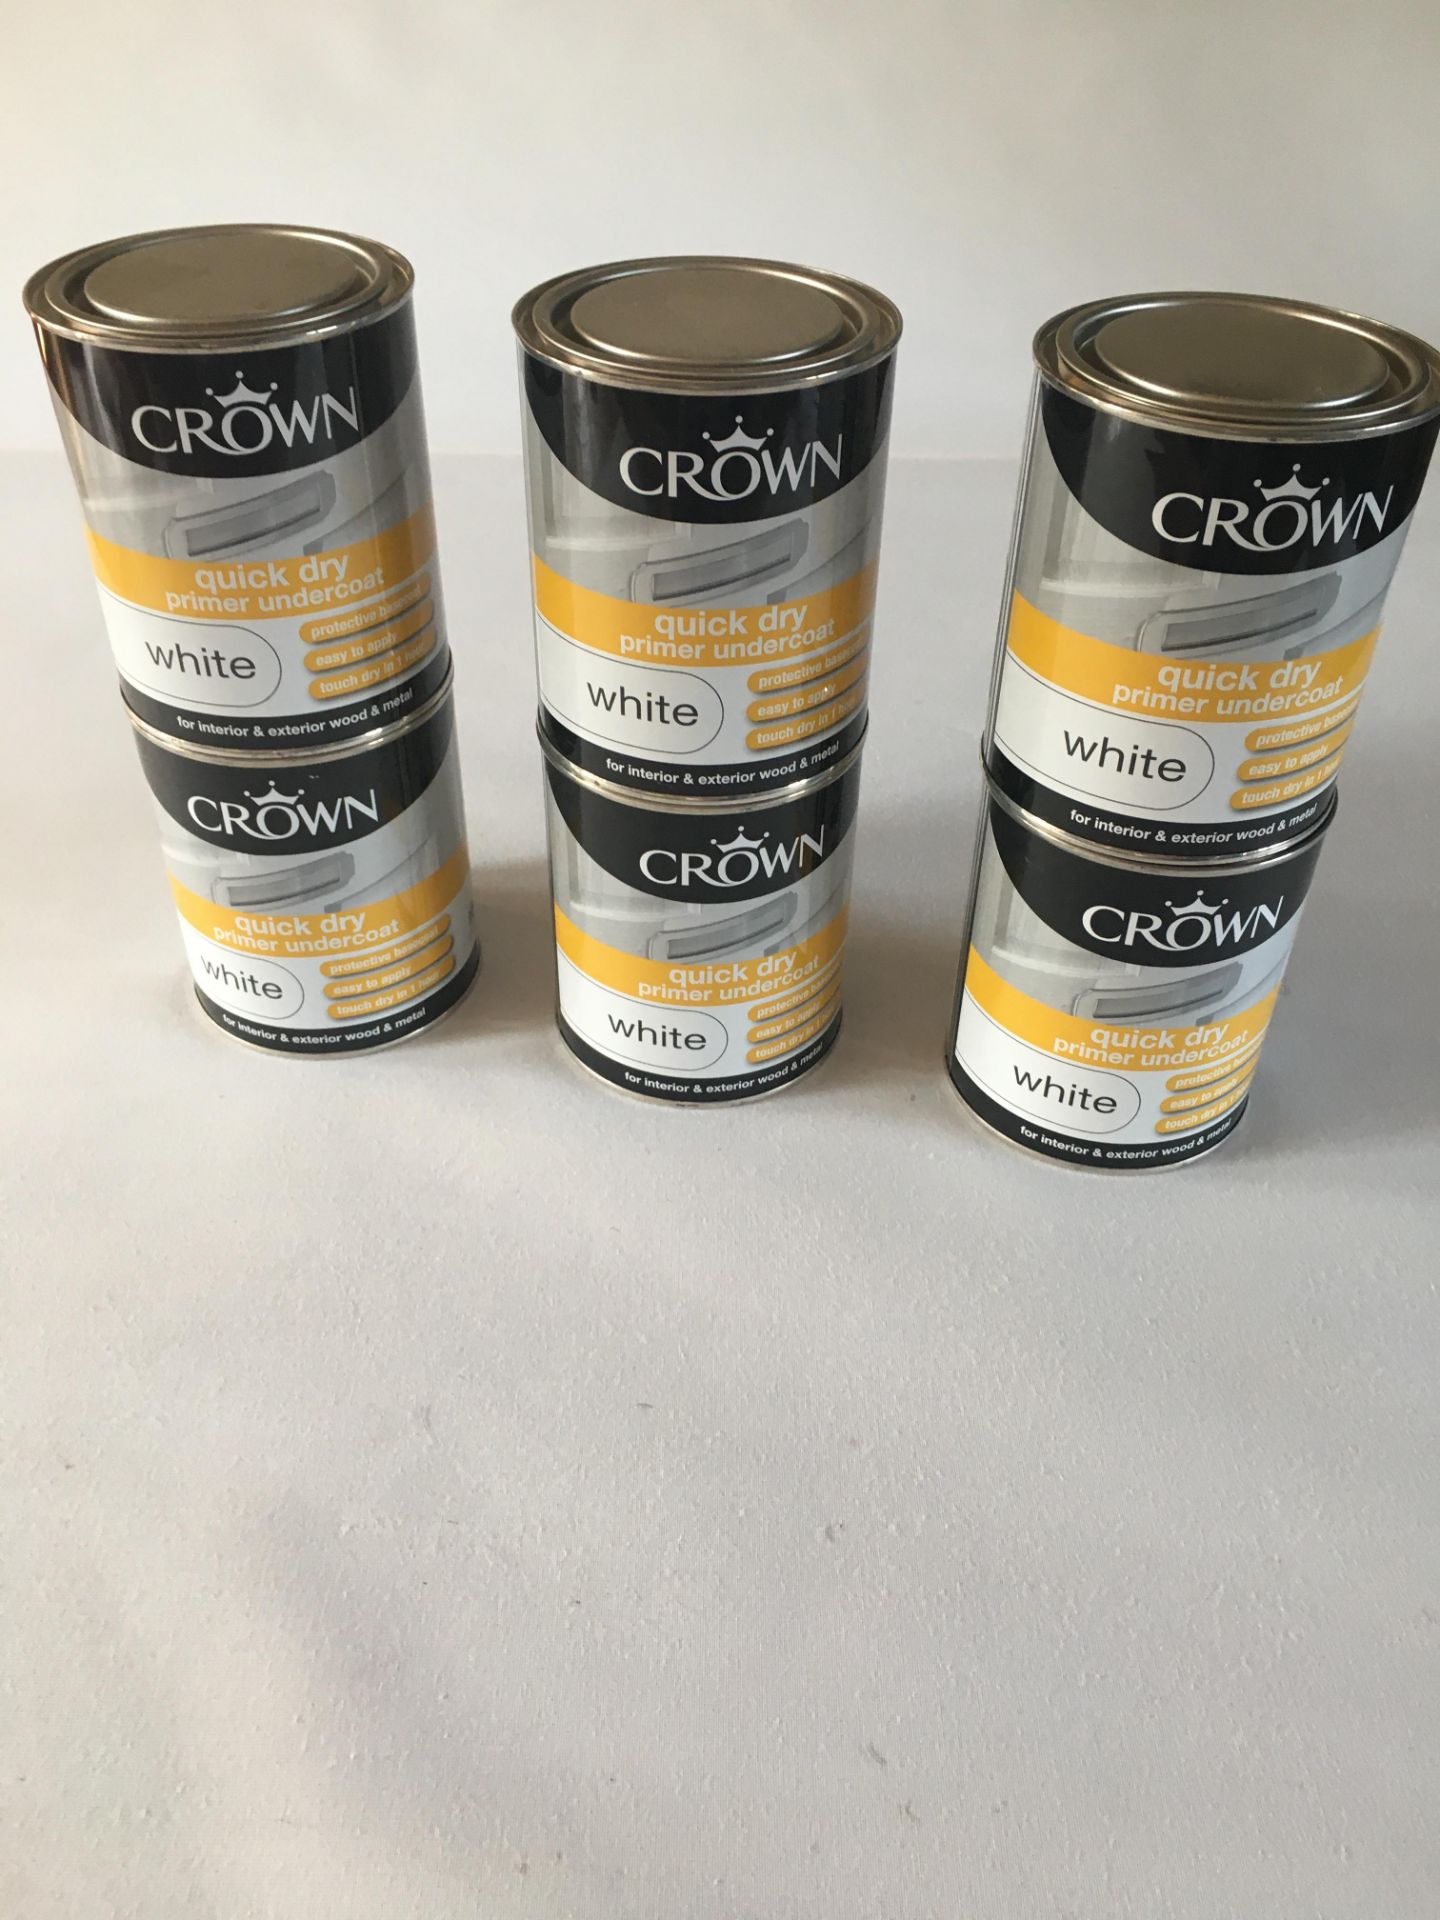 6 x crown quick dry primer undercoat white 750ml rrp £12 - Image 3 of 3